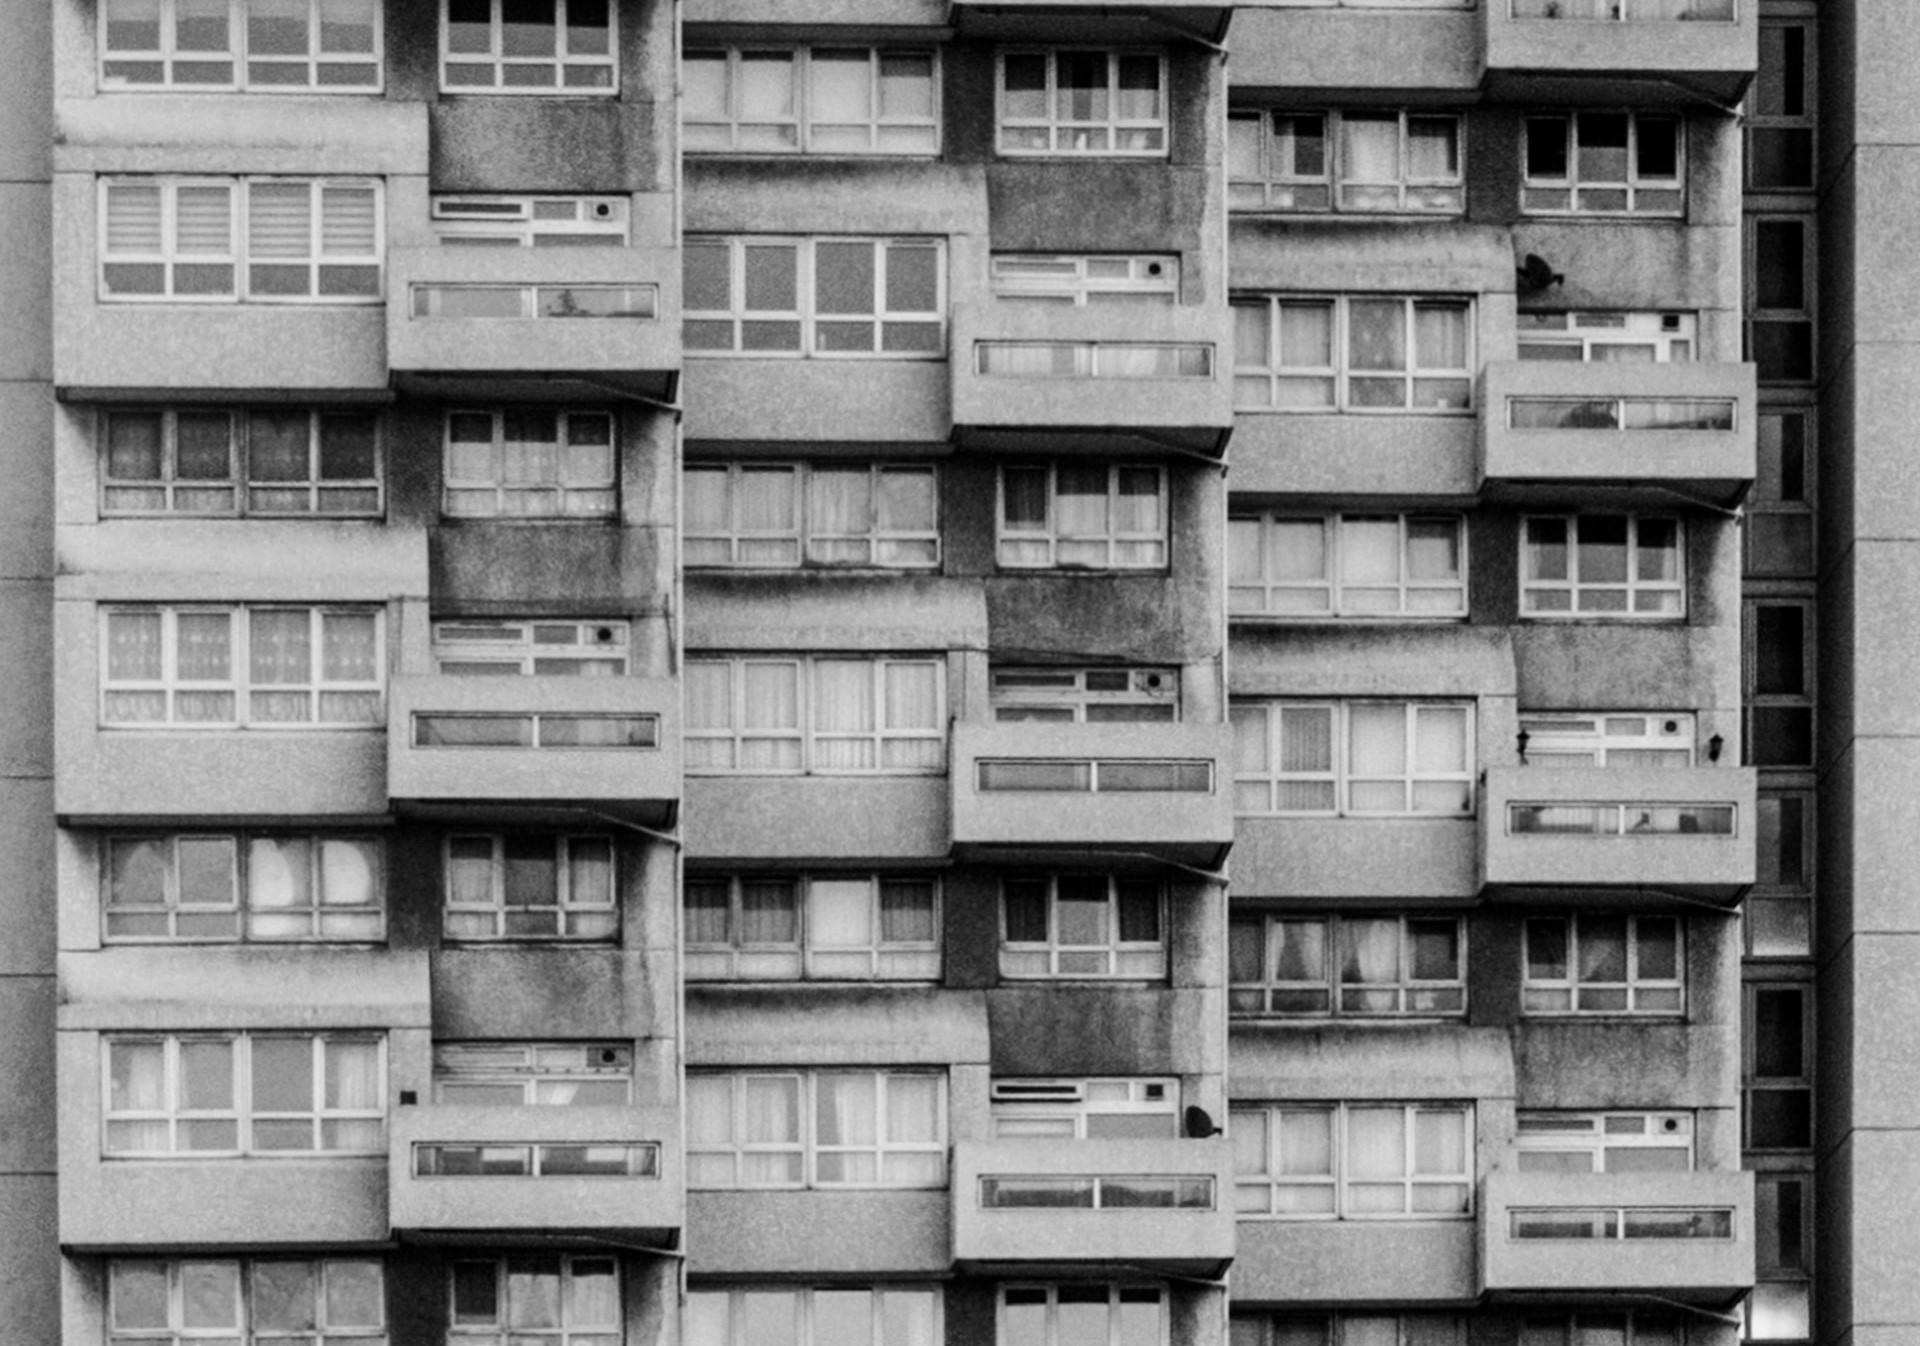 A black and white image of a block of high rise flats